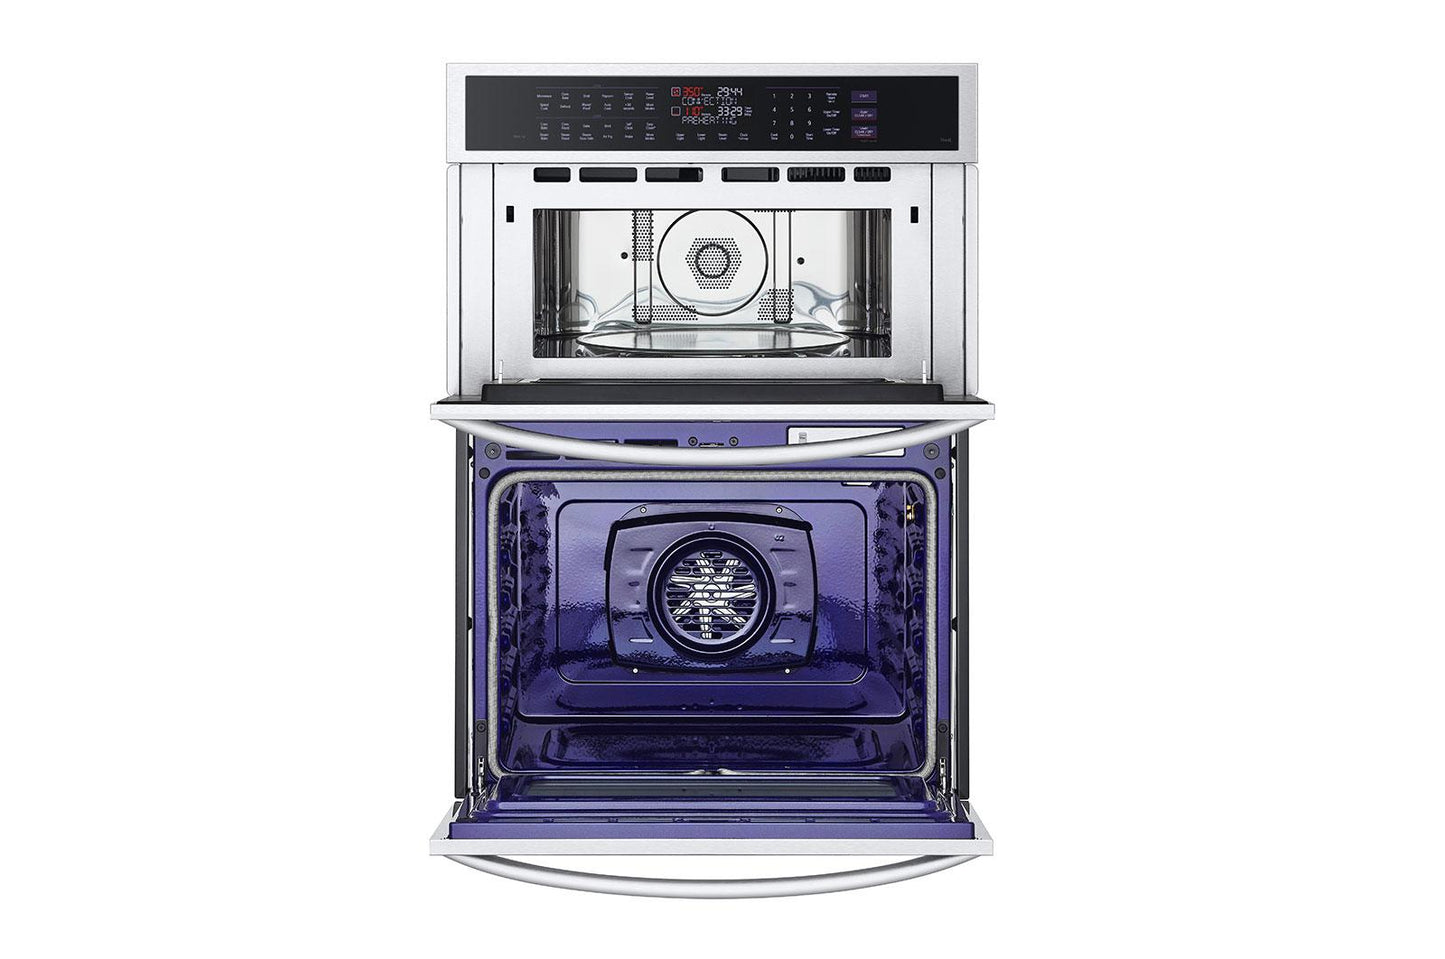 Lg WCEP6427F 1.7/4.7 Cu. Ft. Smart Combination Wall Oven With Instaview®, True Convection, Air Fry, And Steam Sous Vide